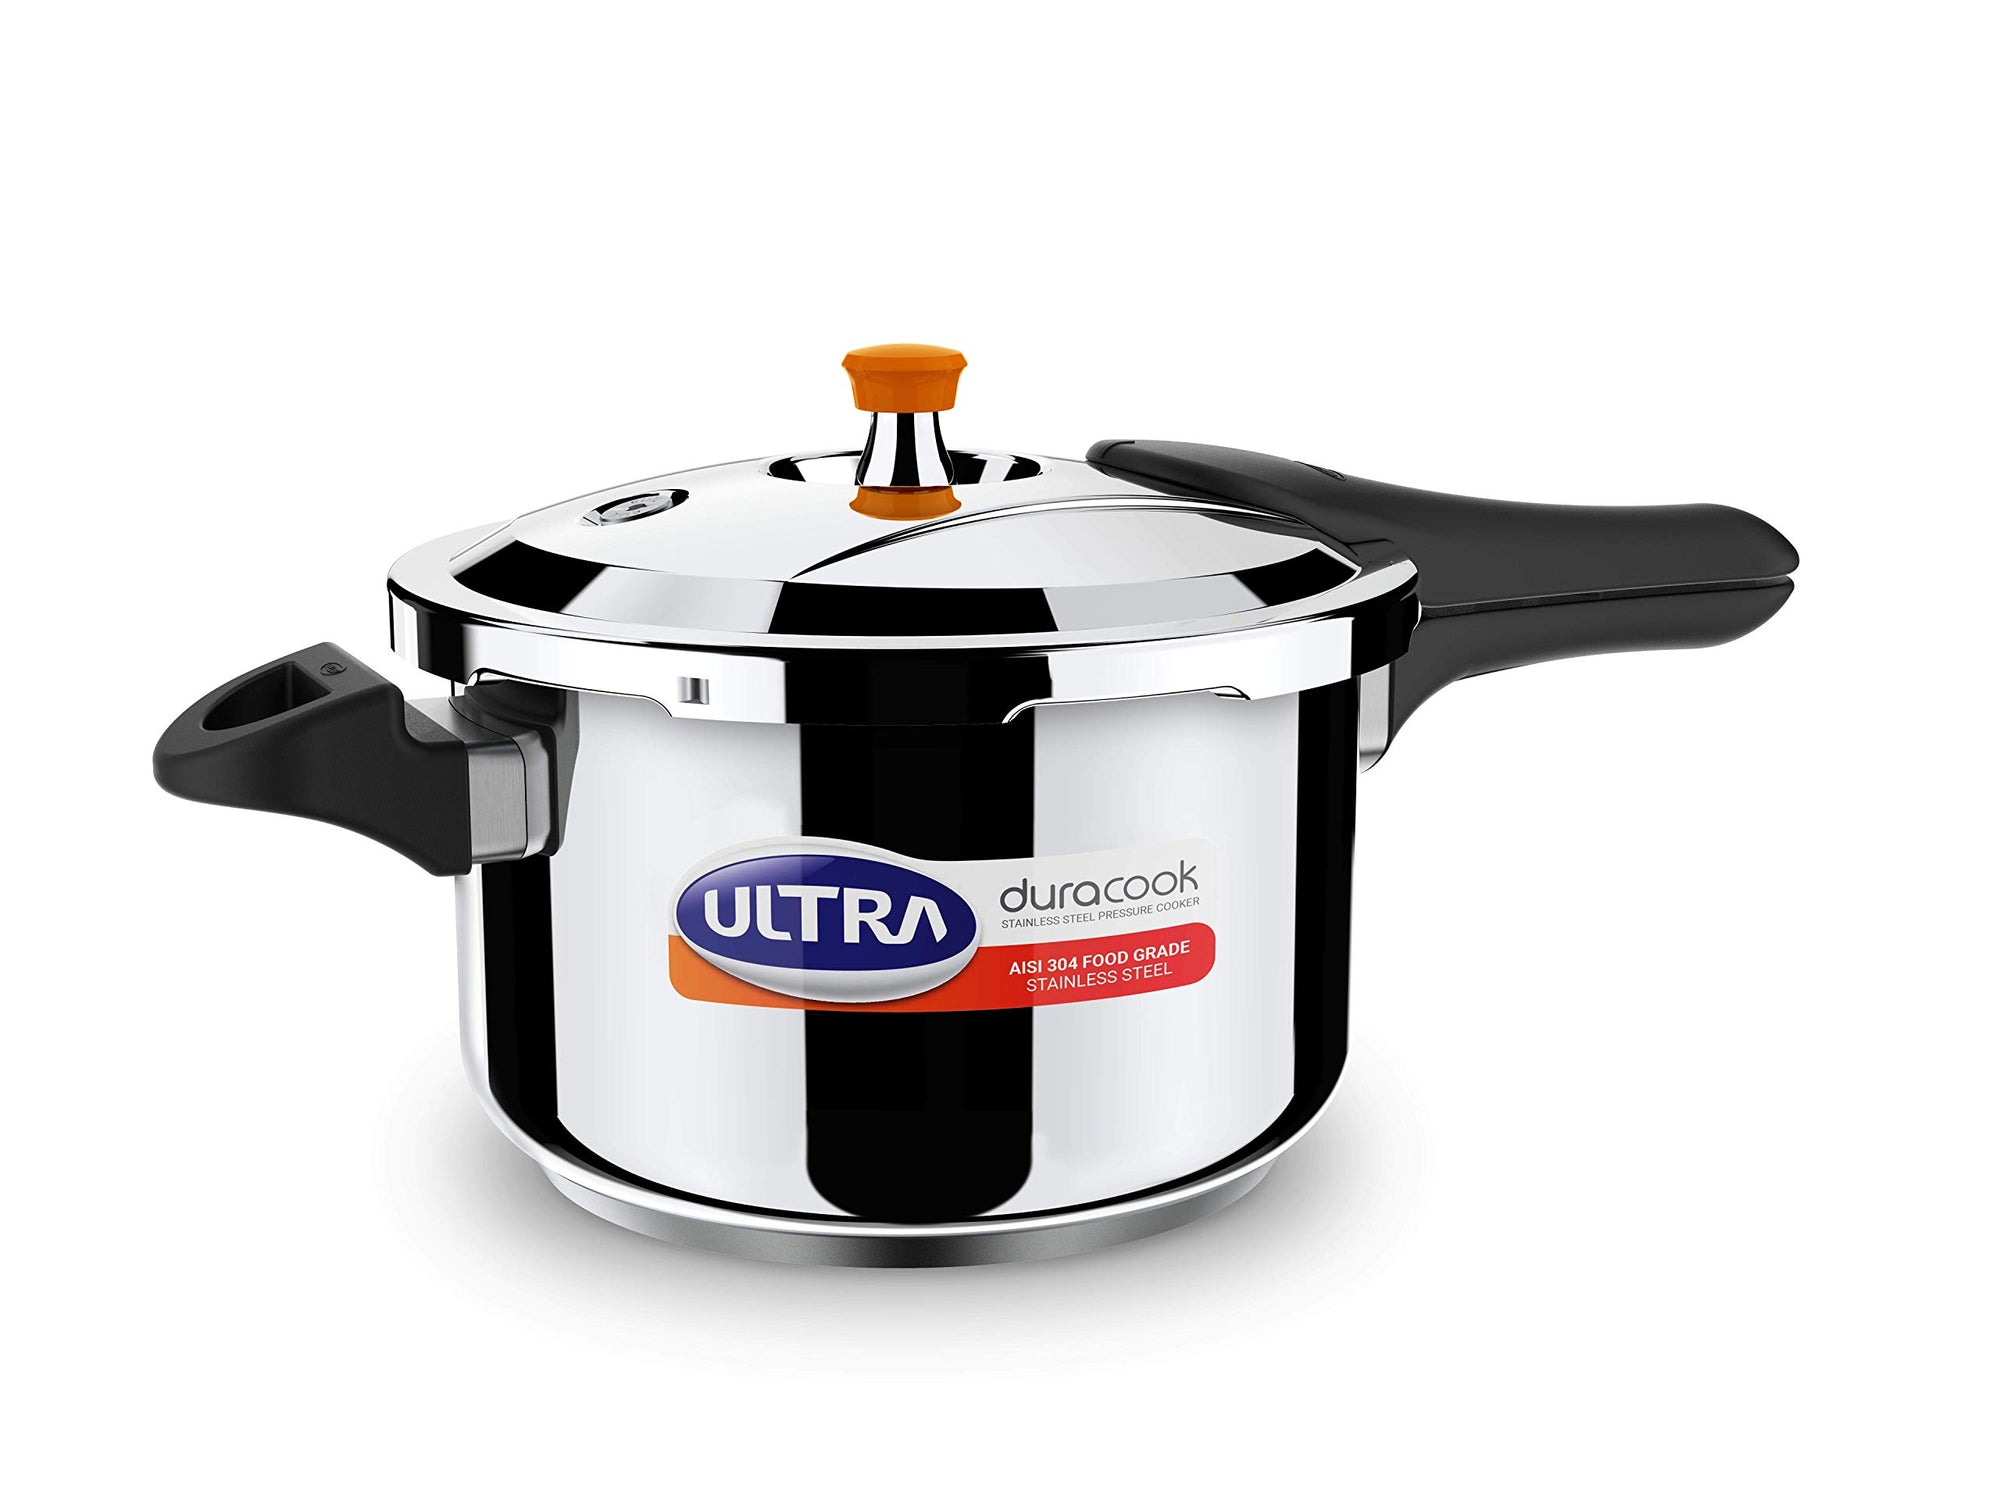 Ultra Duracook Stainless Steel Outer Lid Pressure Cooker, 5.5 liter